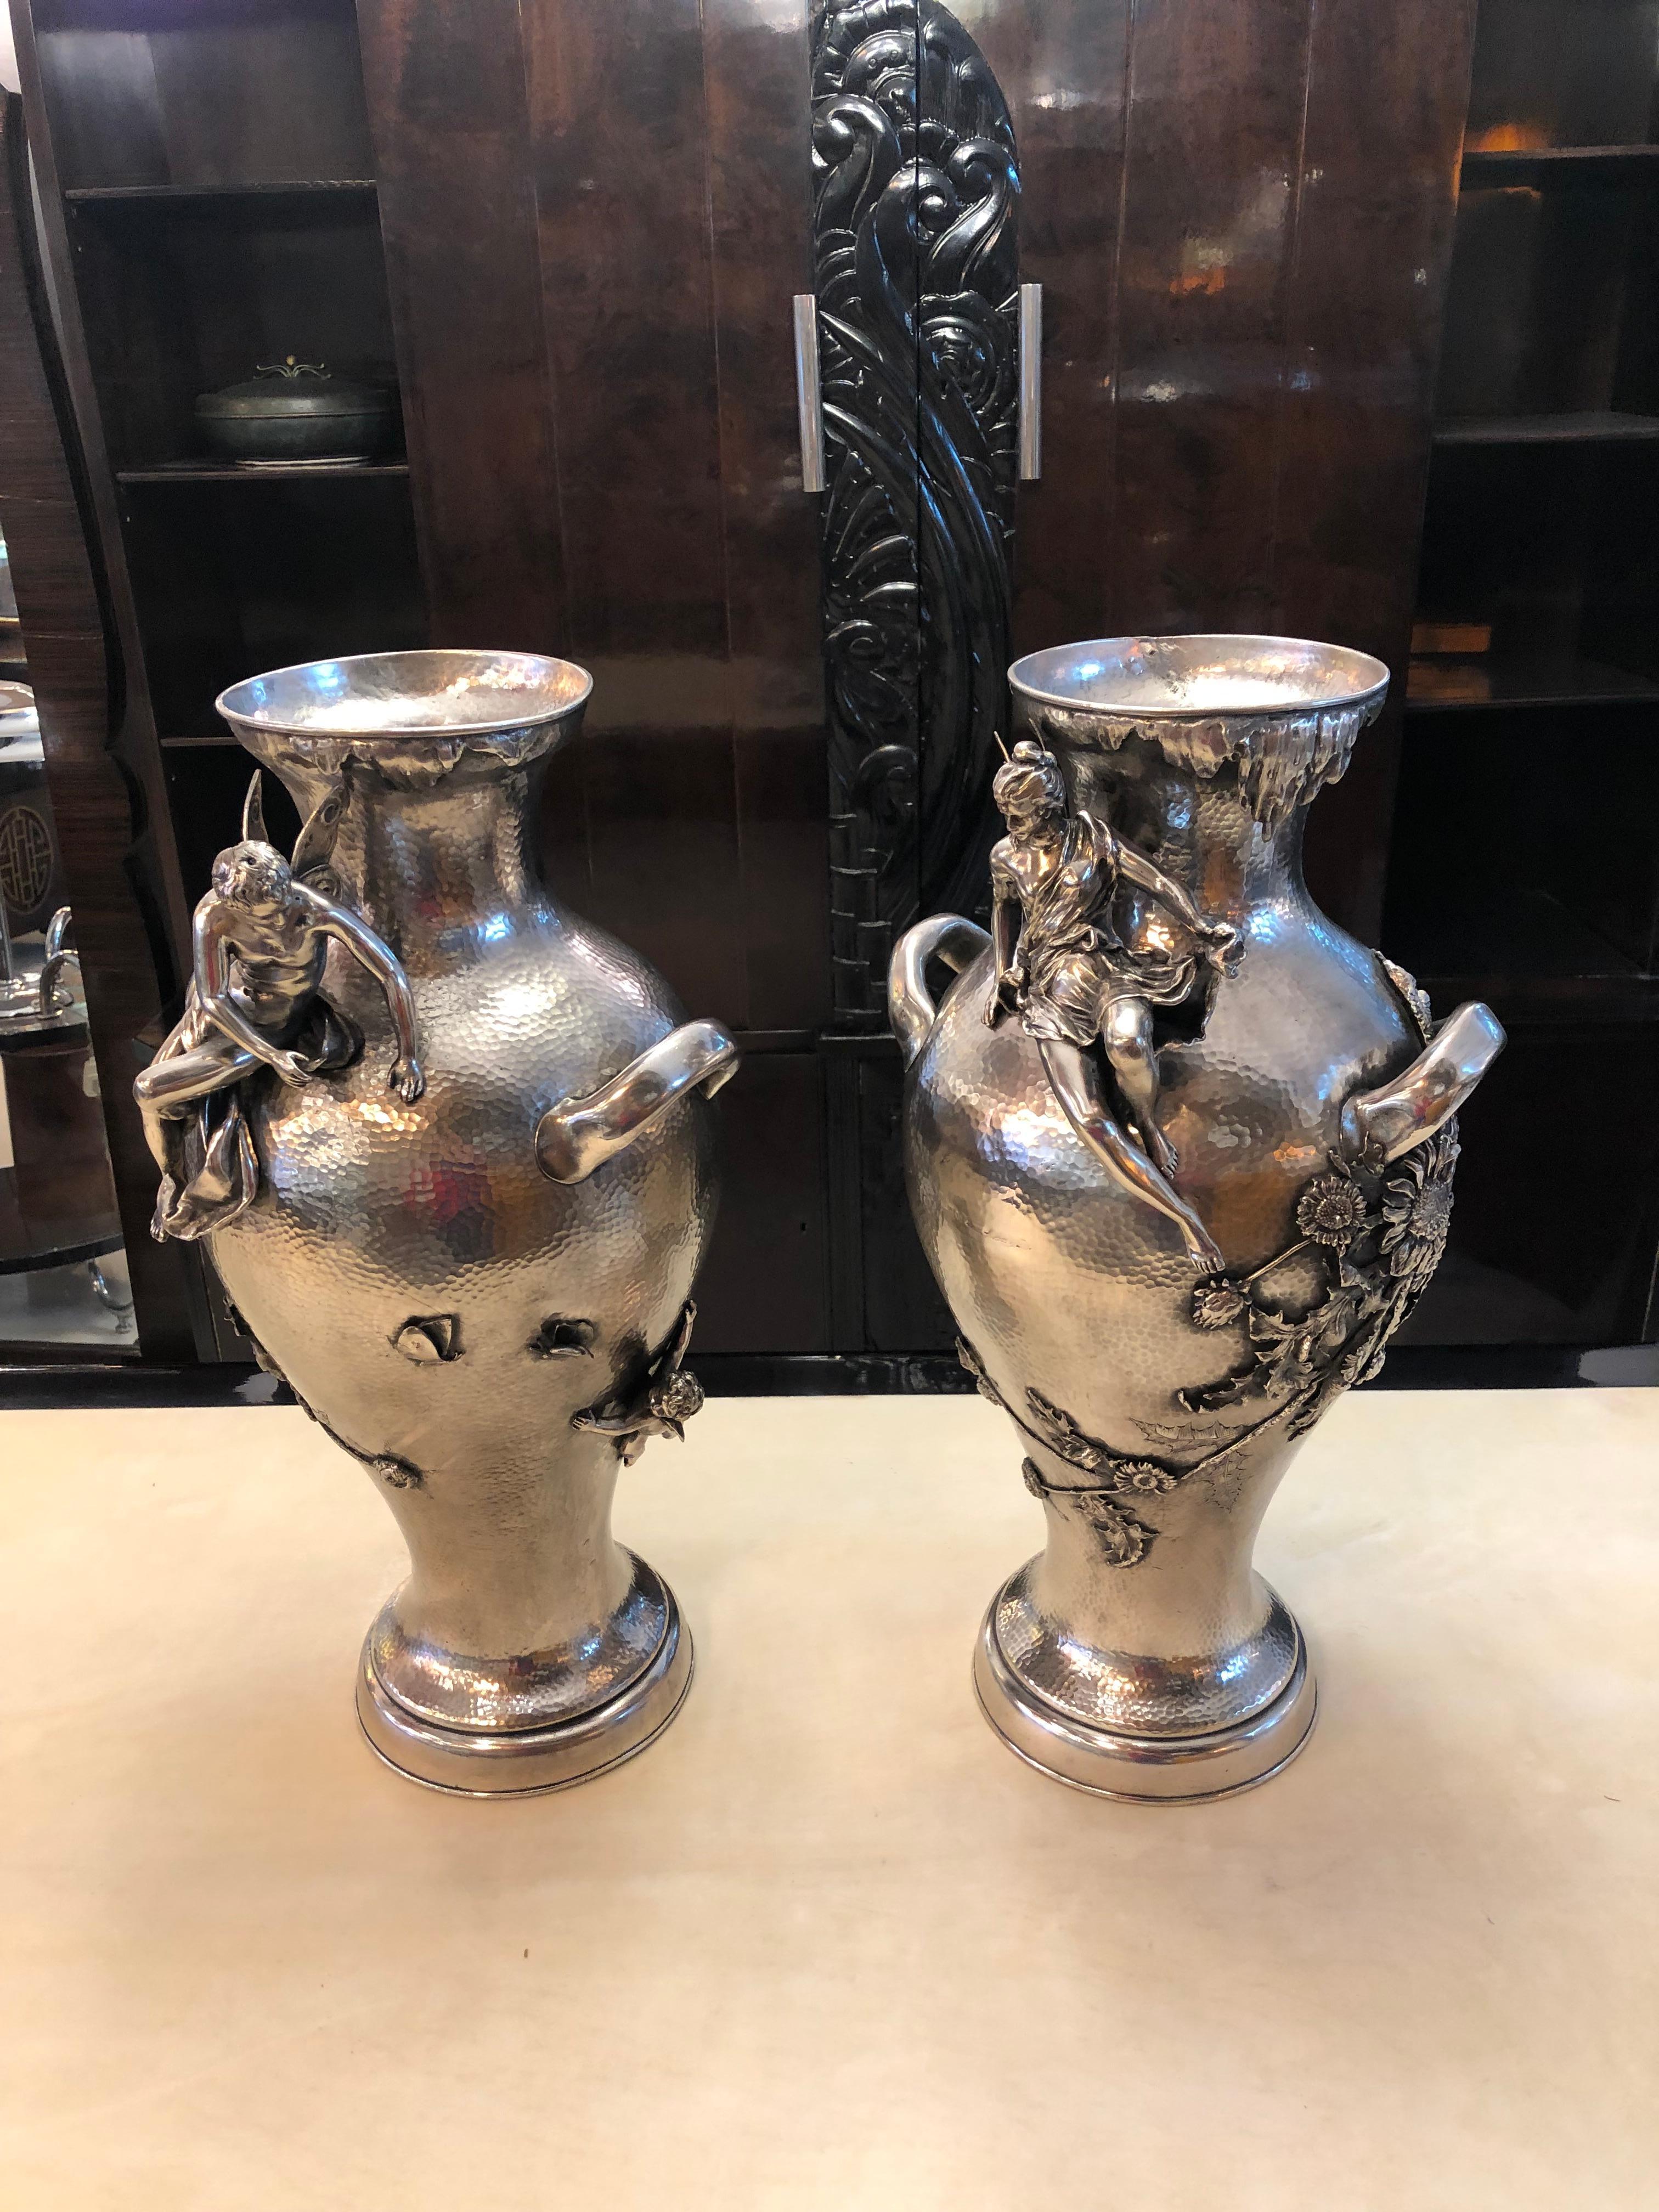 Materials: silver plated 
We have specialized in the sale of Art Deco and Art Nouveau and Vintage styles since 1982.If you have any questions we are at your disposal.
Pushing the button that reads 'View All From Seller'. And you can see more objects